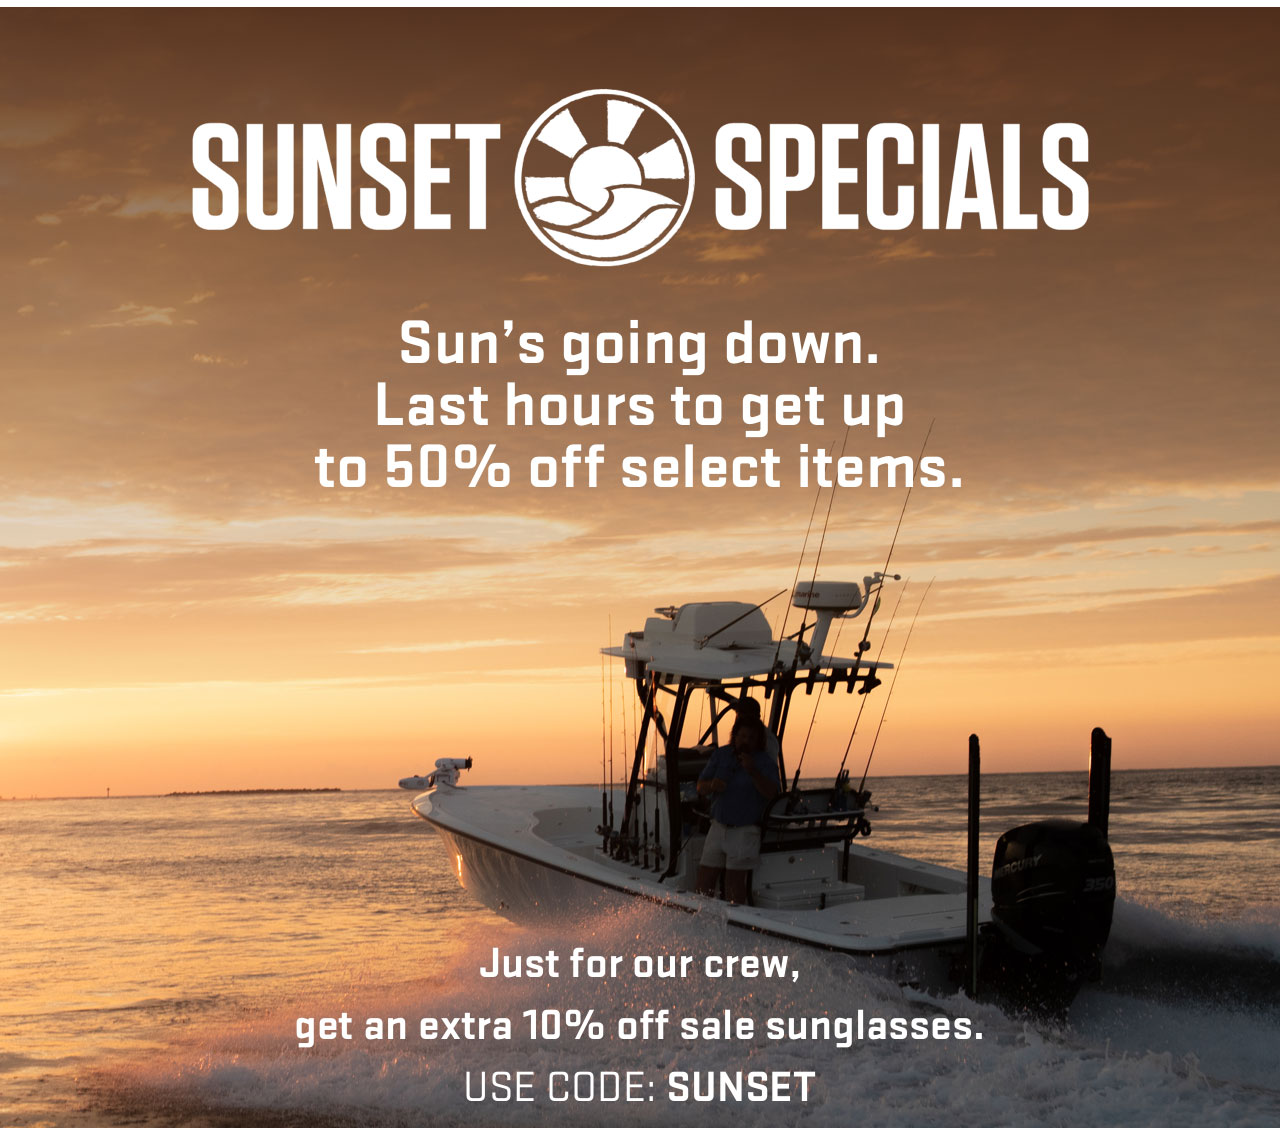 

SUNSET SPECIALS

Sun's going down.
Last hours to get up
to 50% off select items.  

Just for our crew,
get an extra 10% off sale sunglasses.
USE CODE: SUNSET


									